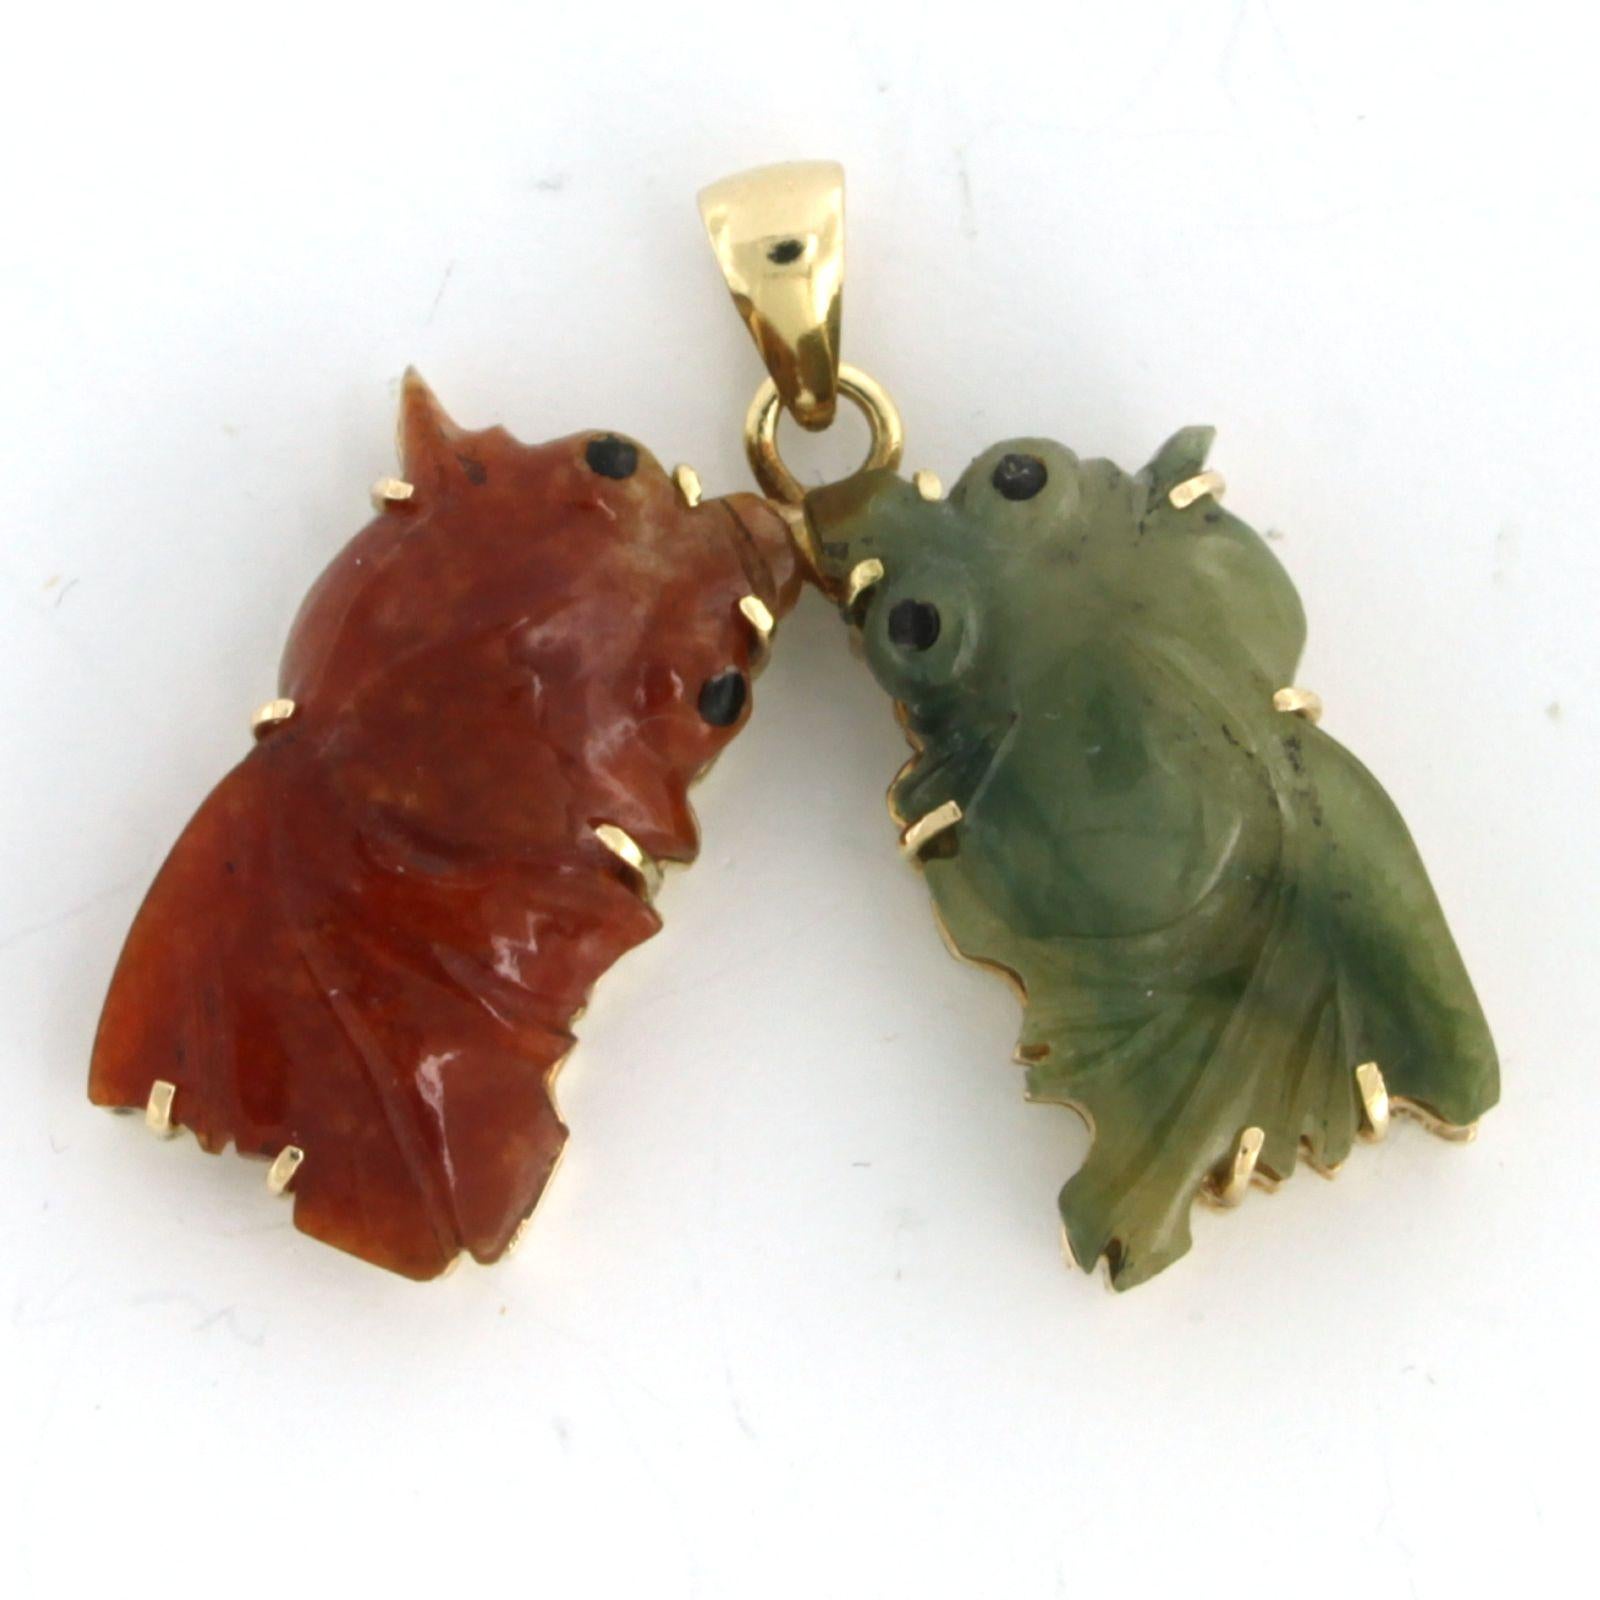 14k yellow gold pendant with two jadeite goldfish

Detailed description

The pendant is 3.1 cm high and 3.9 cm wide

Total weight 9.7 grams

Set with

- 2 x 2.4 cm x 1.4 cm goldfish shape cut jadeite

color: red and green
clarity: n/a

The pendant